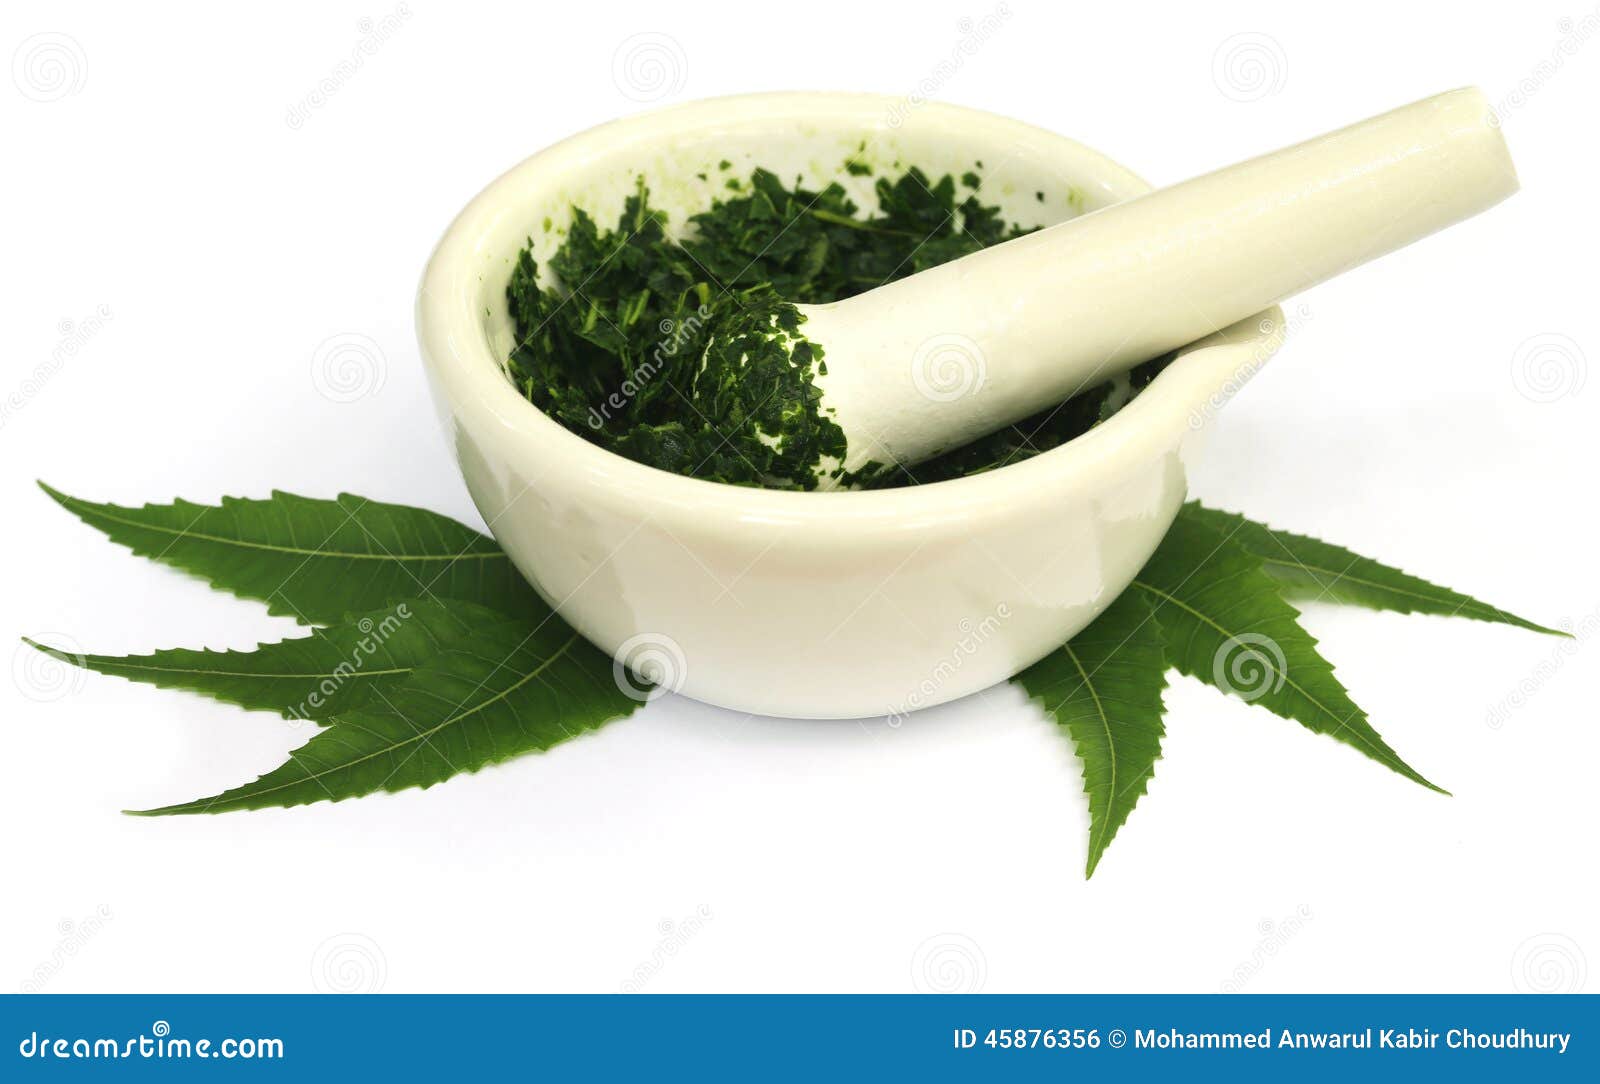 mortar and pestle with medicinal neem leaves